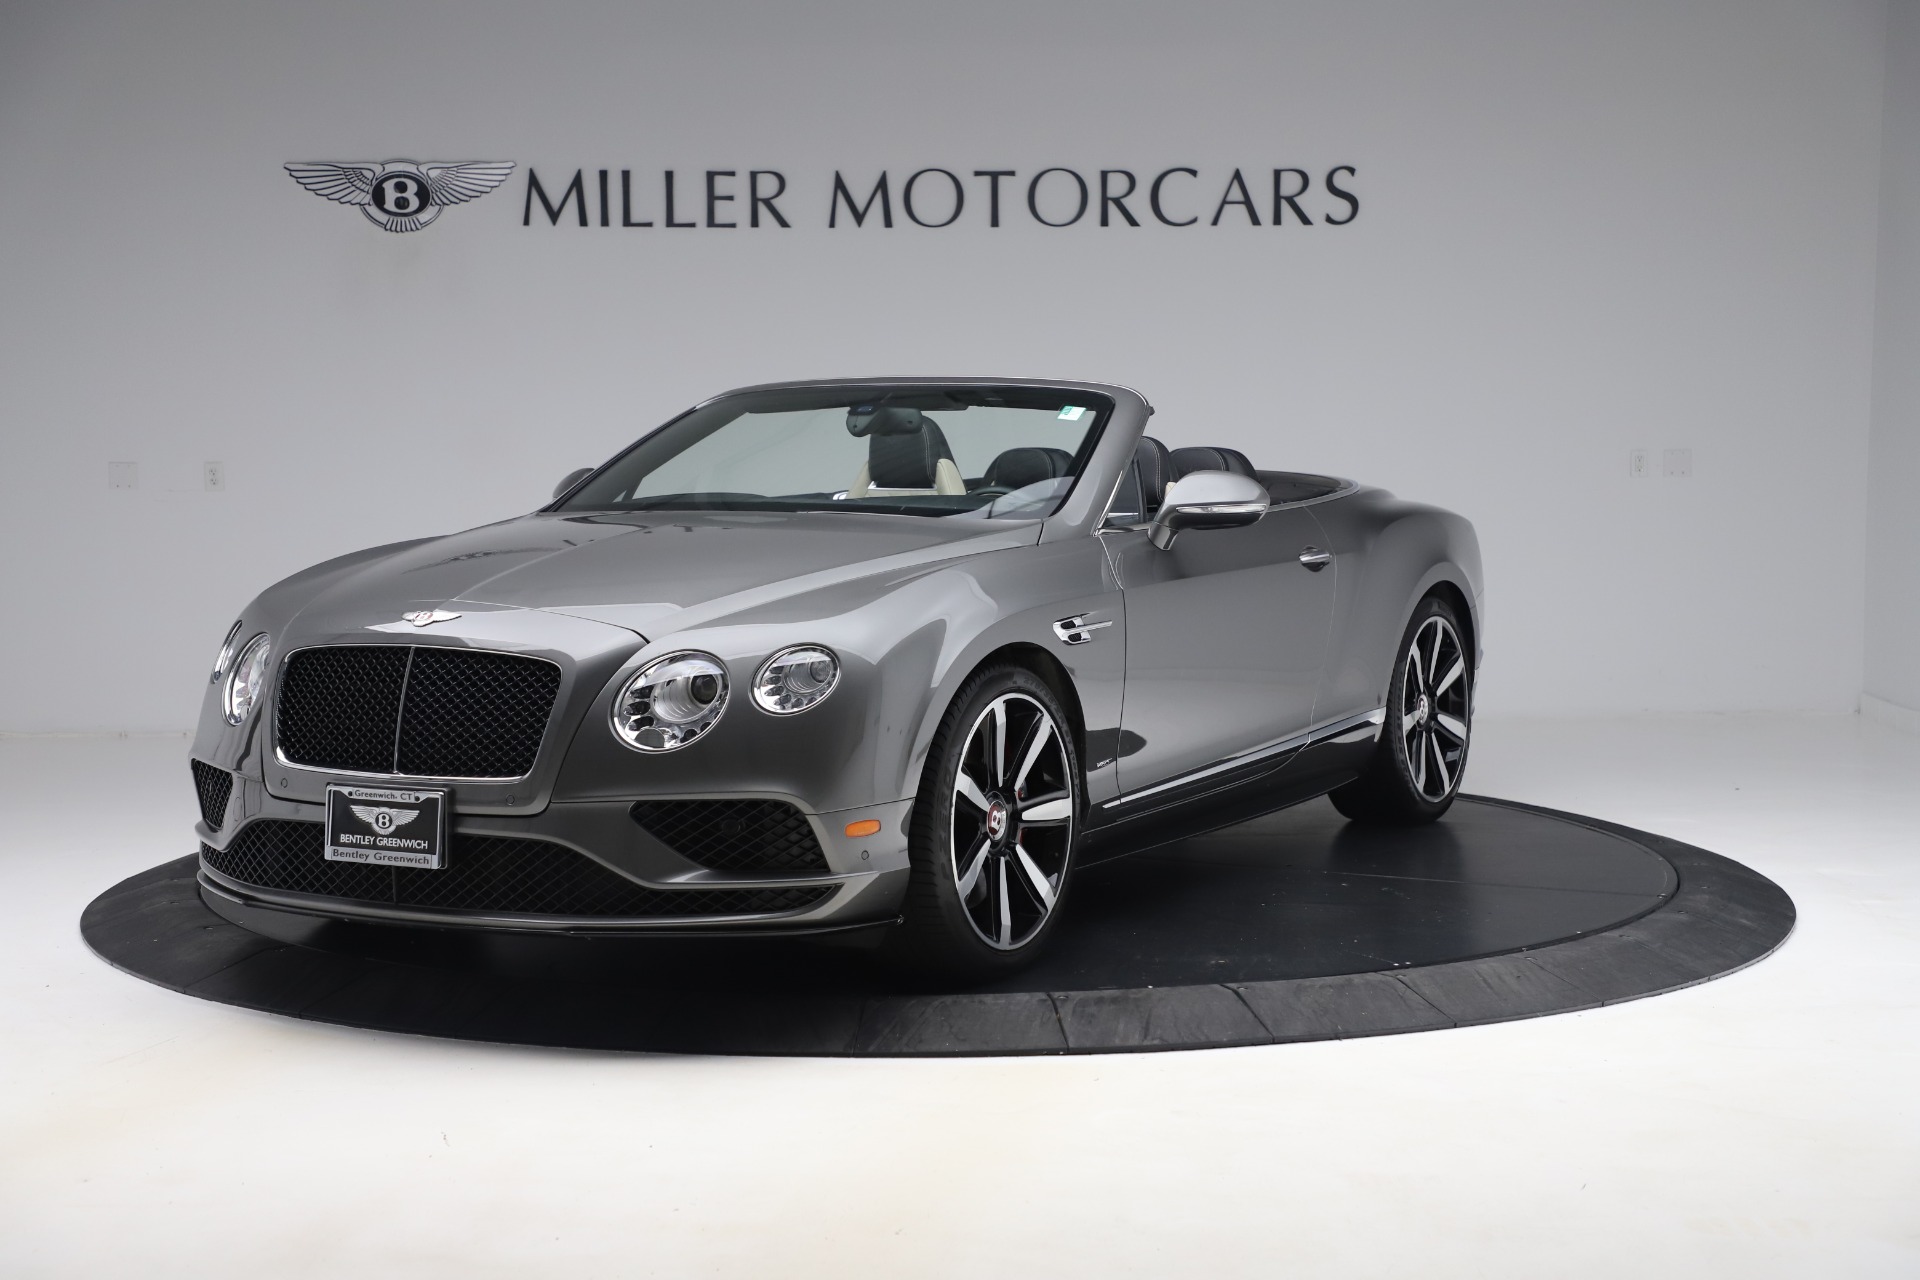 Used 2016 Bentley Continental GT V8 S for sale Sold at Maserati of Westport in Westport CT 06880 1